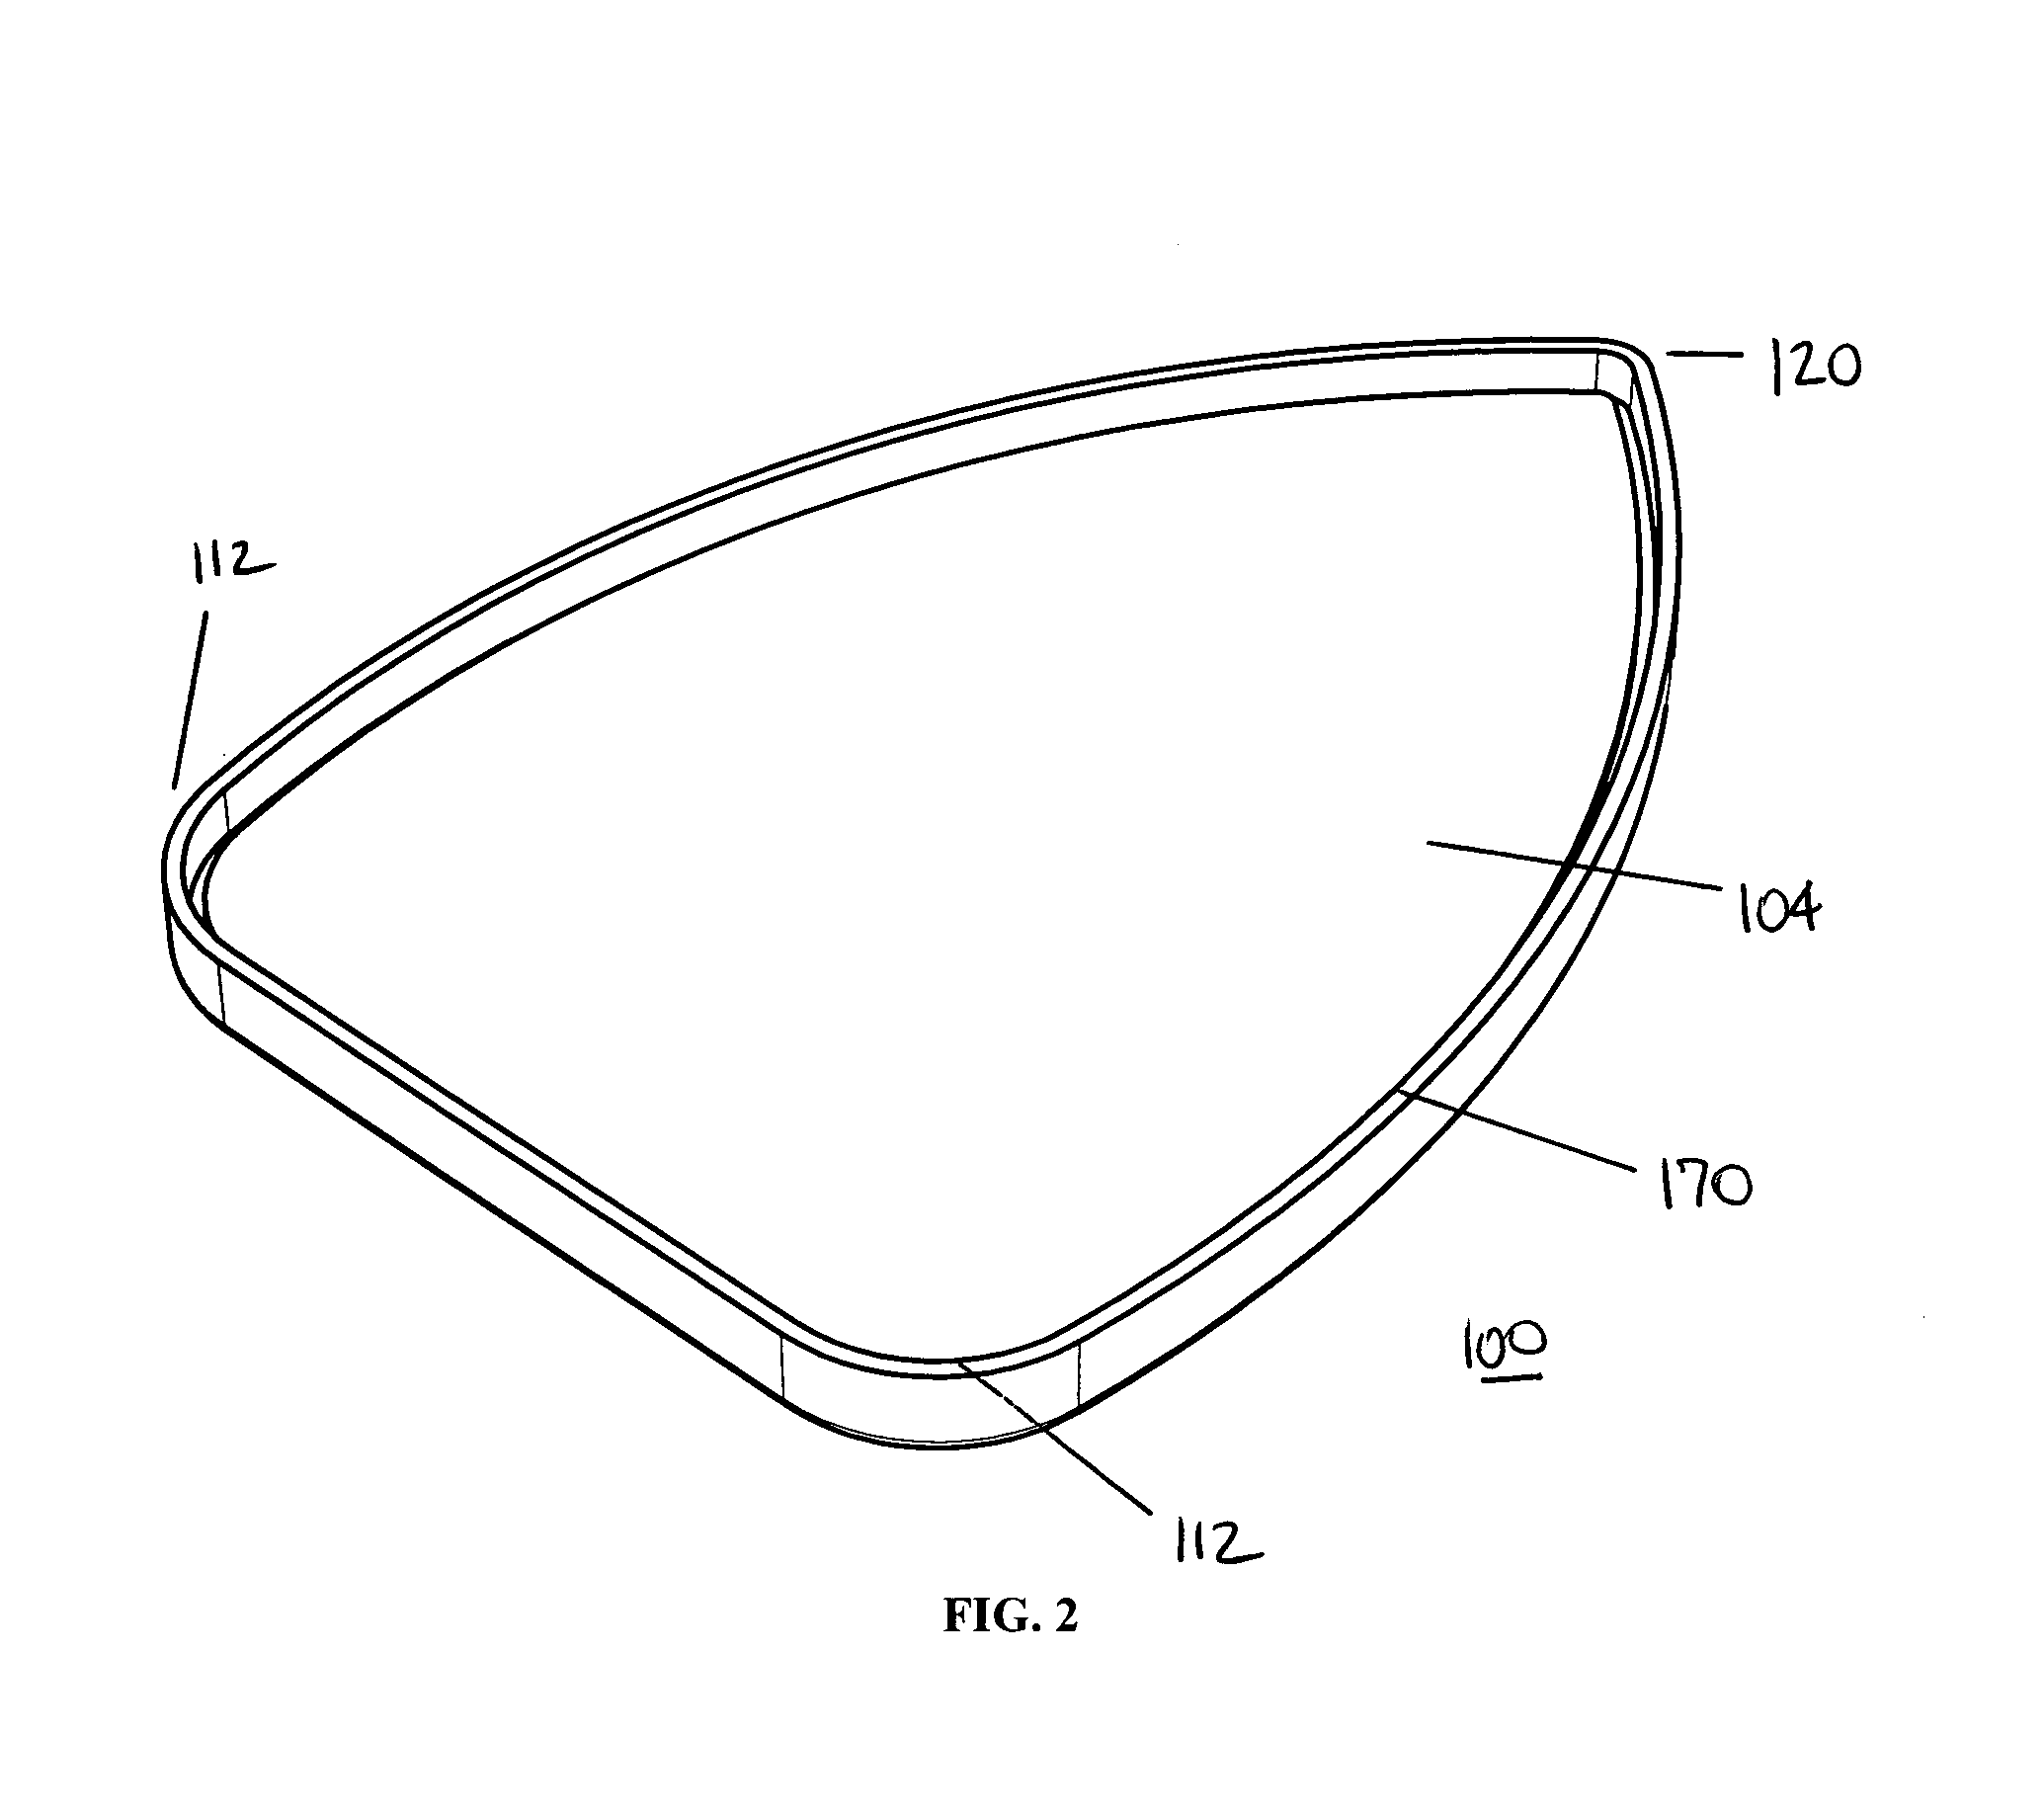 Method and apparatus for plaster burnishing tool